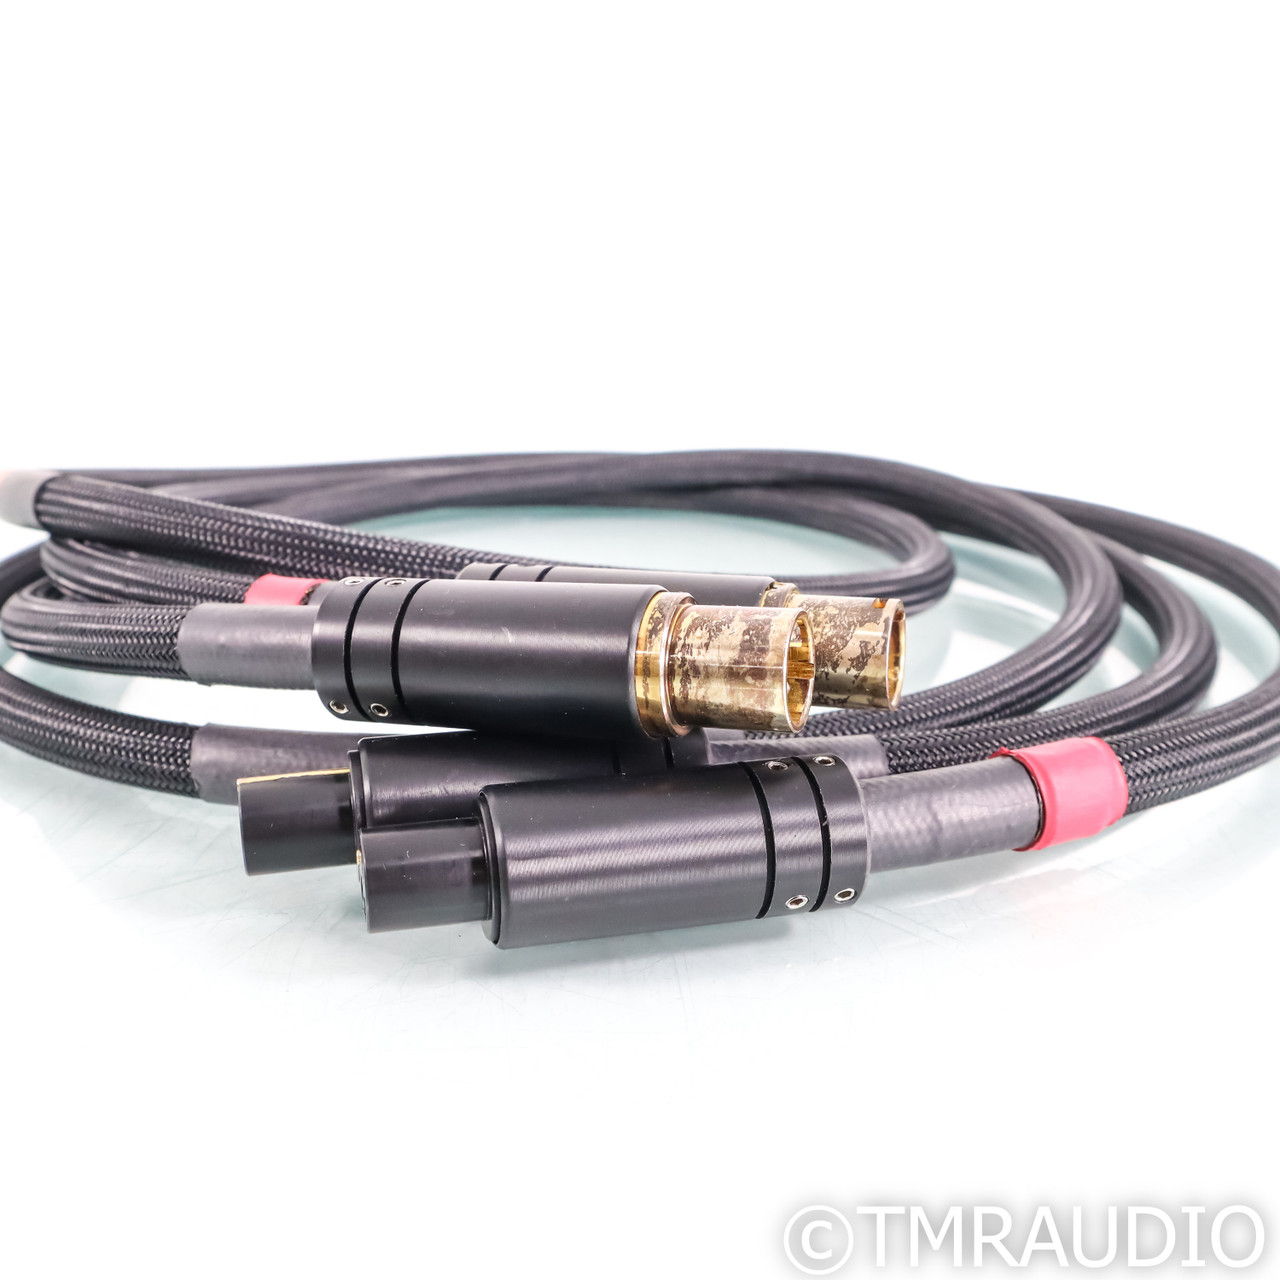 Cable Research Lab Bronze XLR Cables; 2m Pair Balanced ...